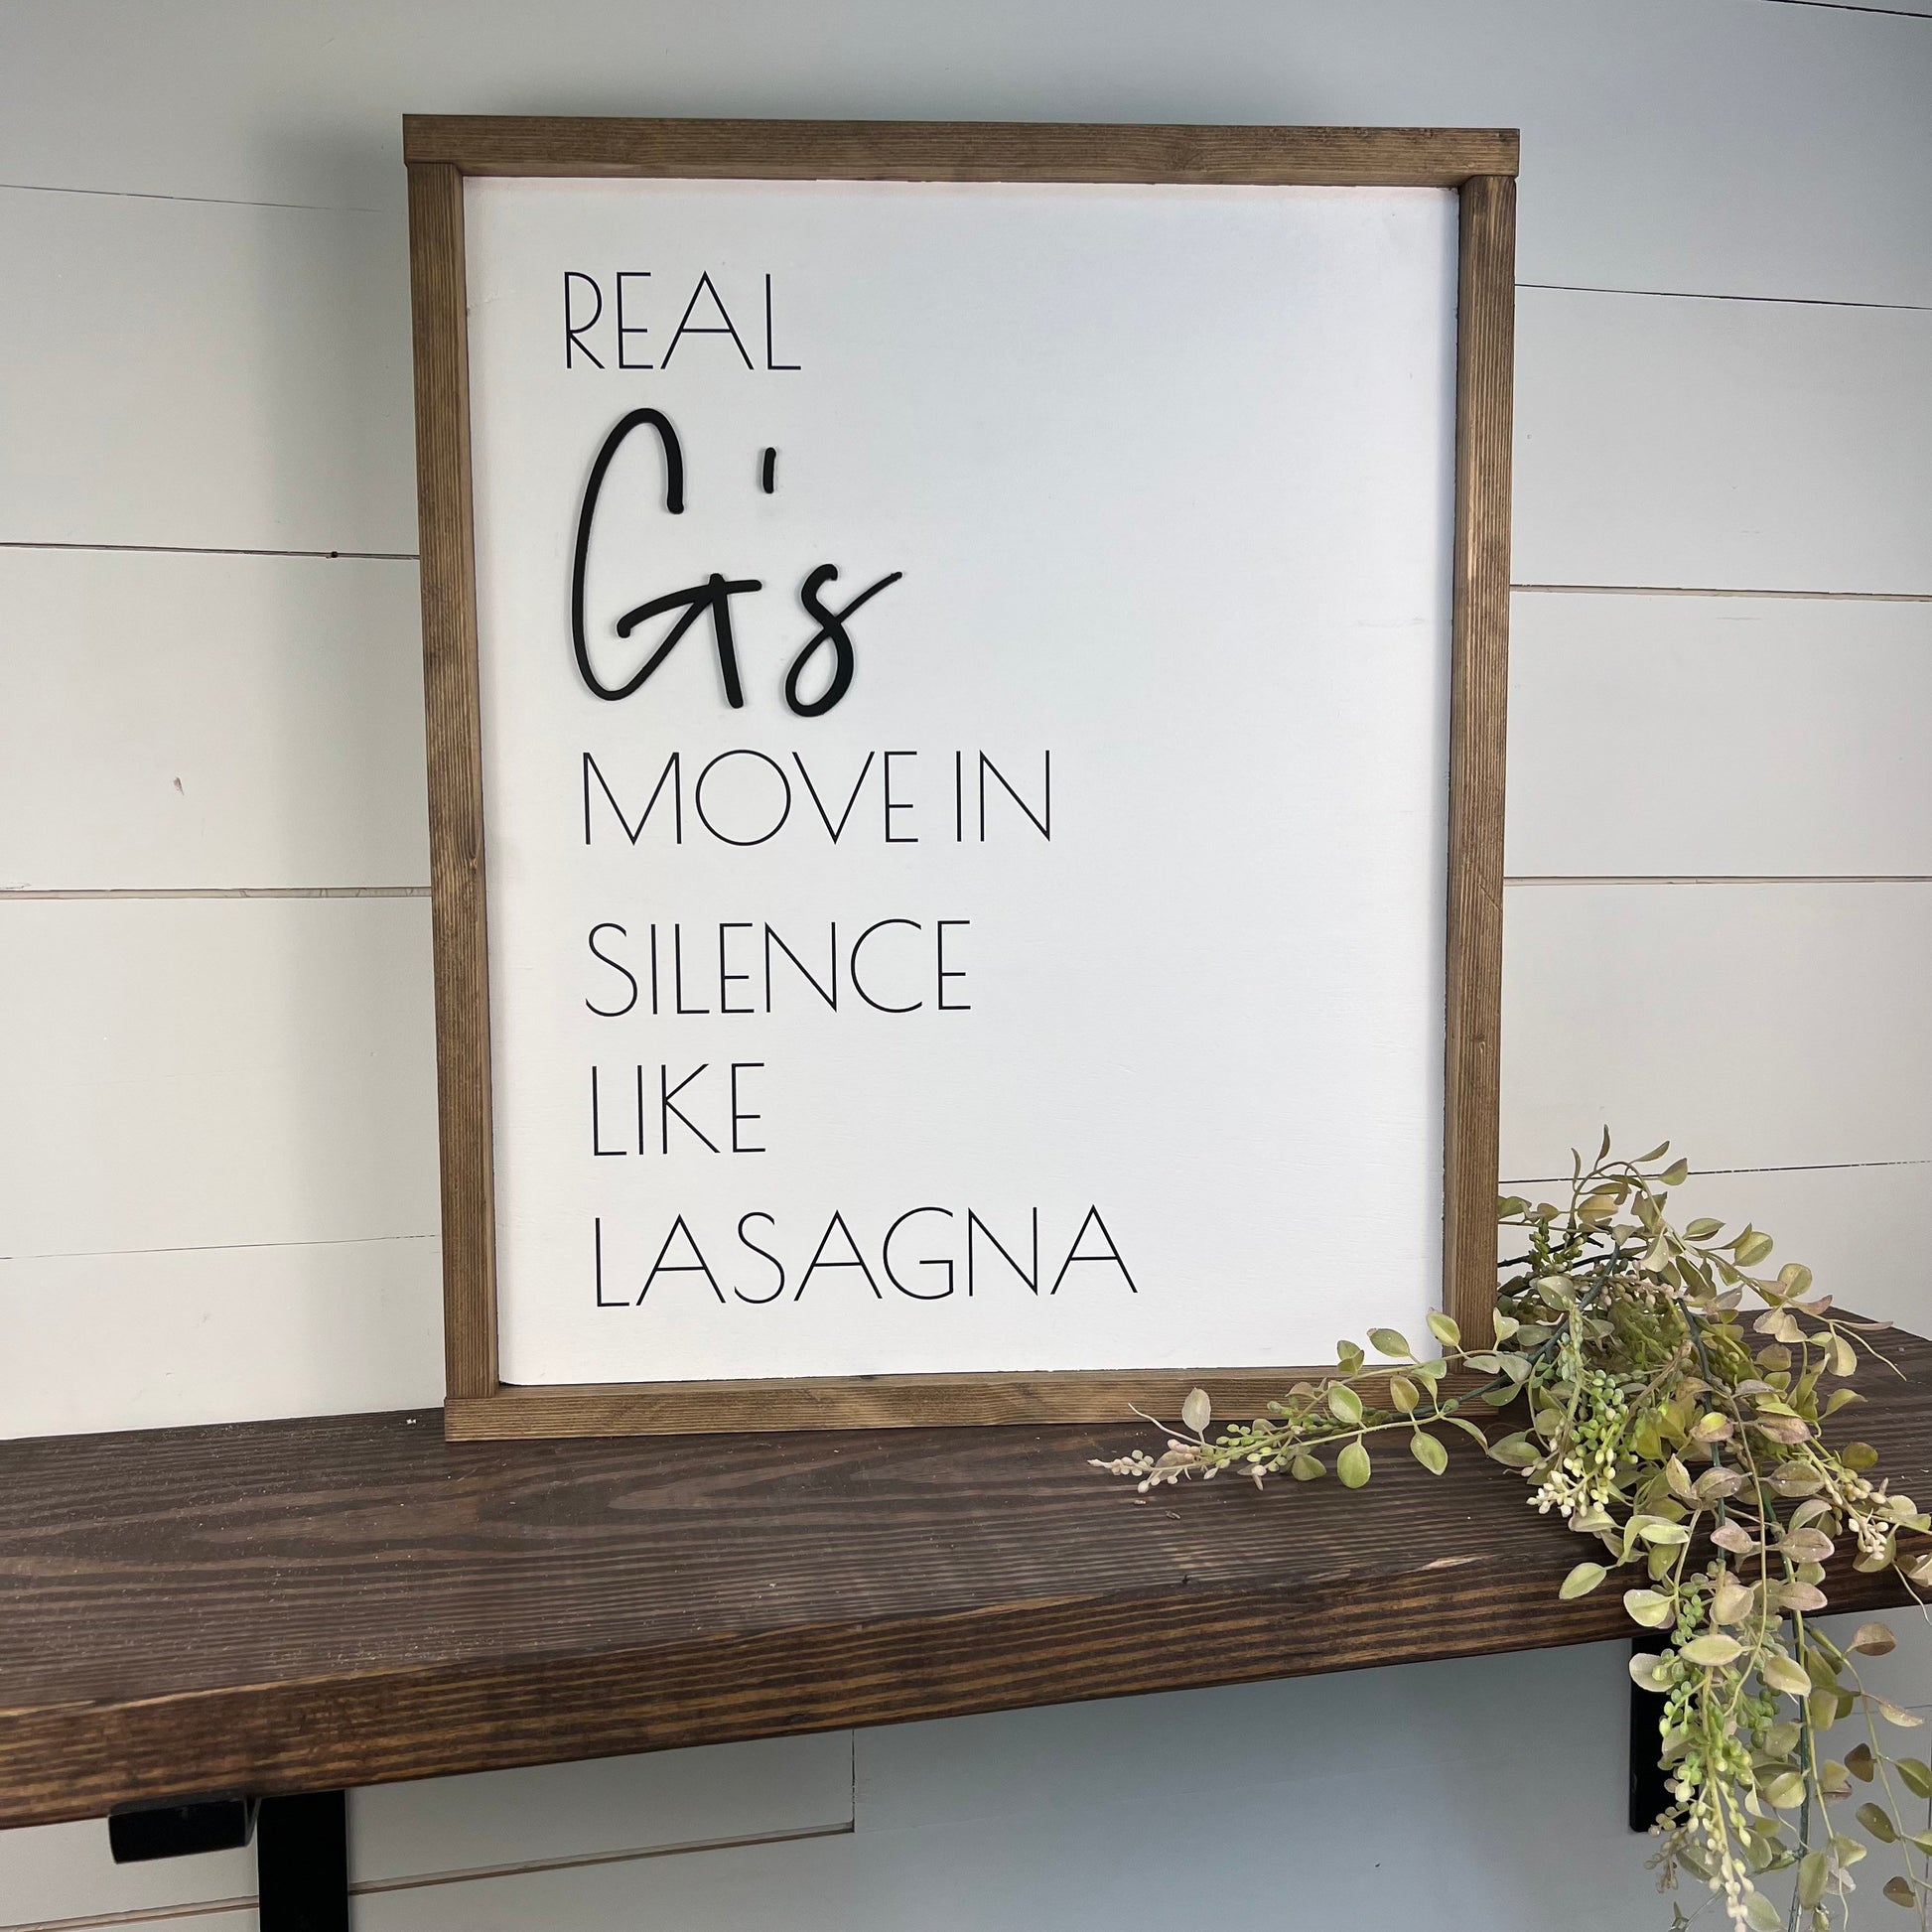 real G’s move in silence like lasagna sign [FREE SHIPPING]